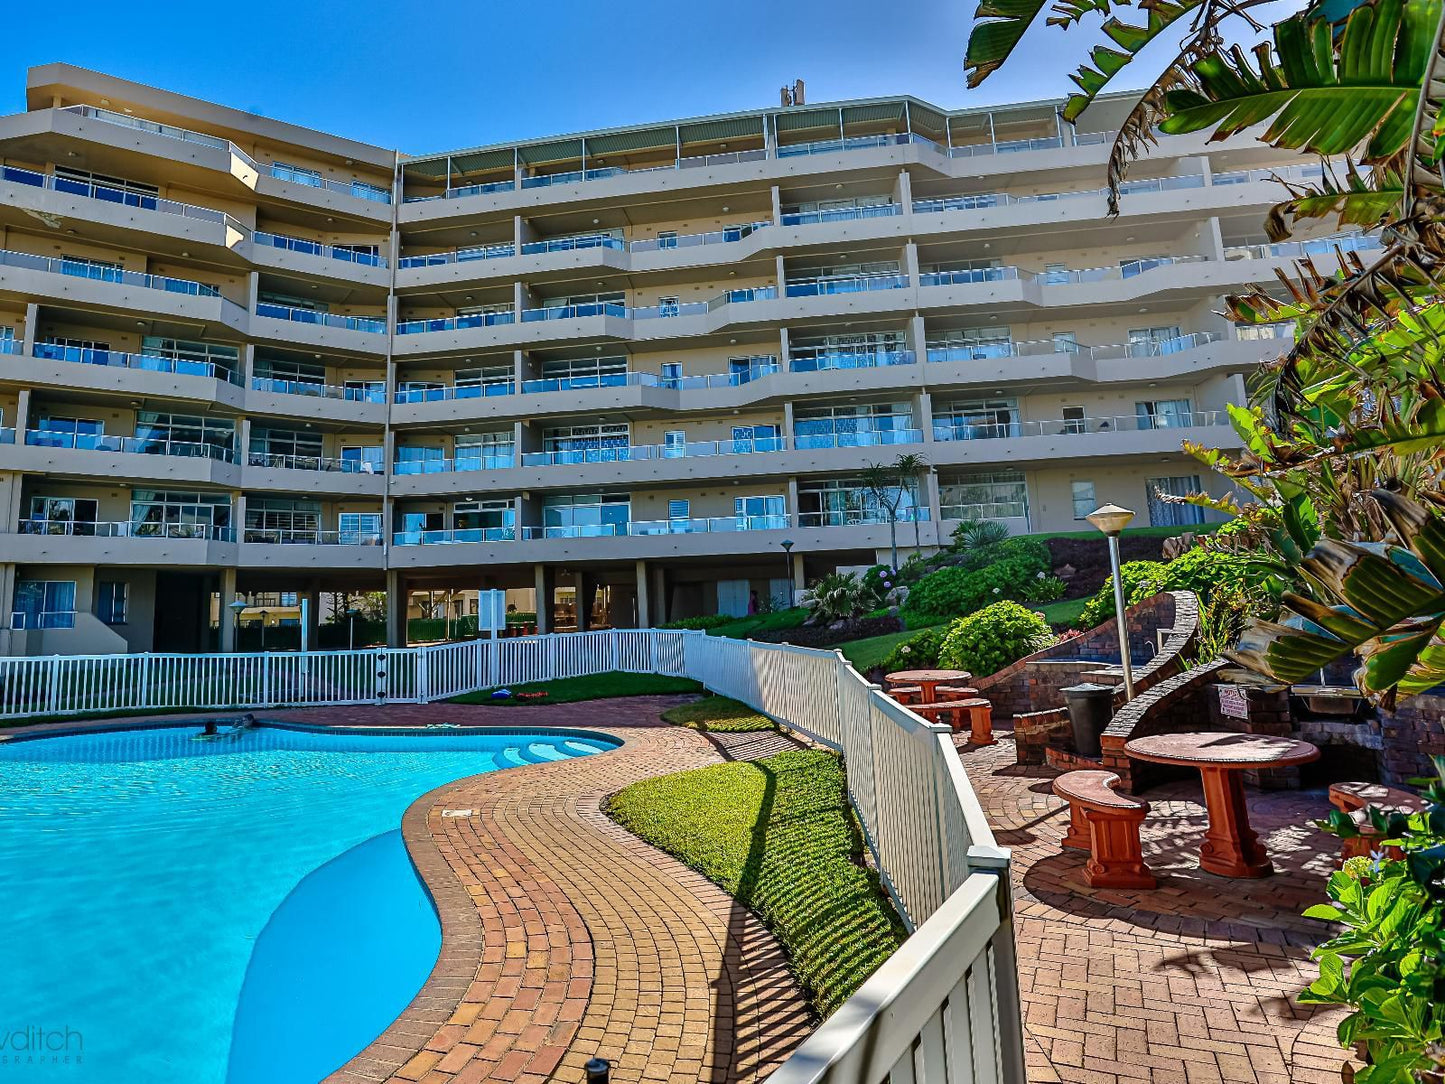 Sands Affordable Luxury On The Beach Ballito Kwazulu Natal South Africa Complementary Colors, Swimming Pool